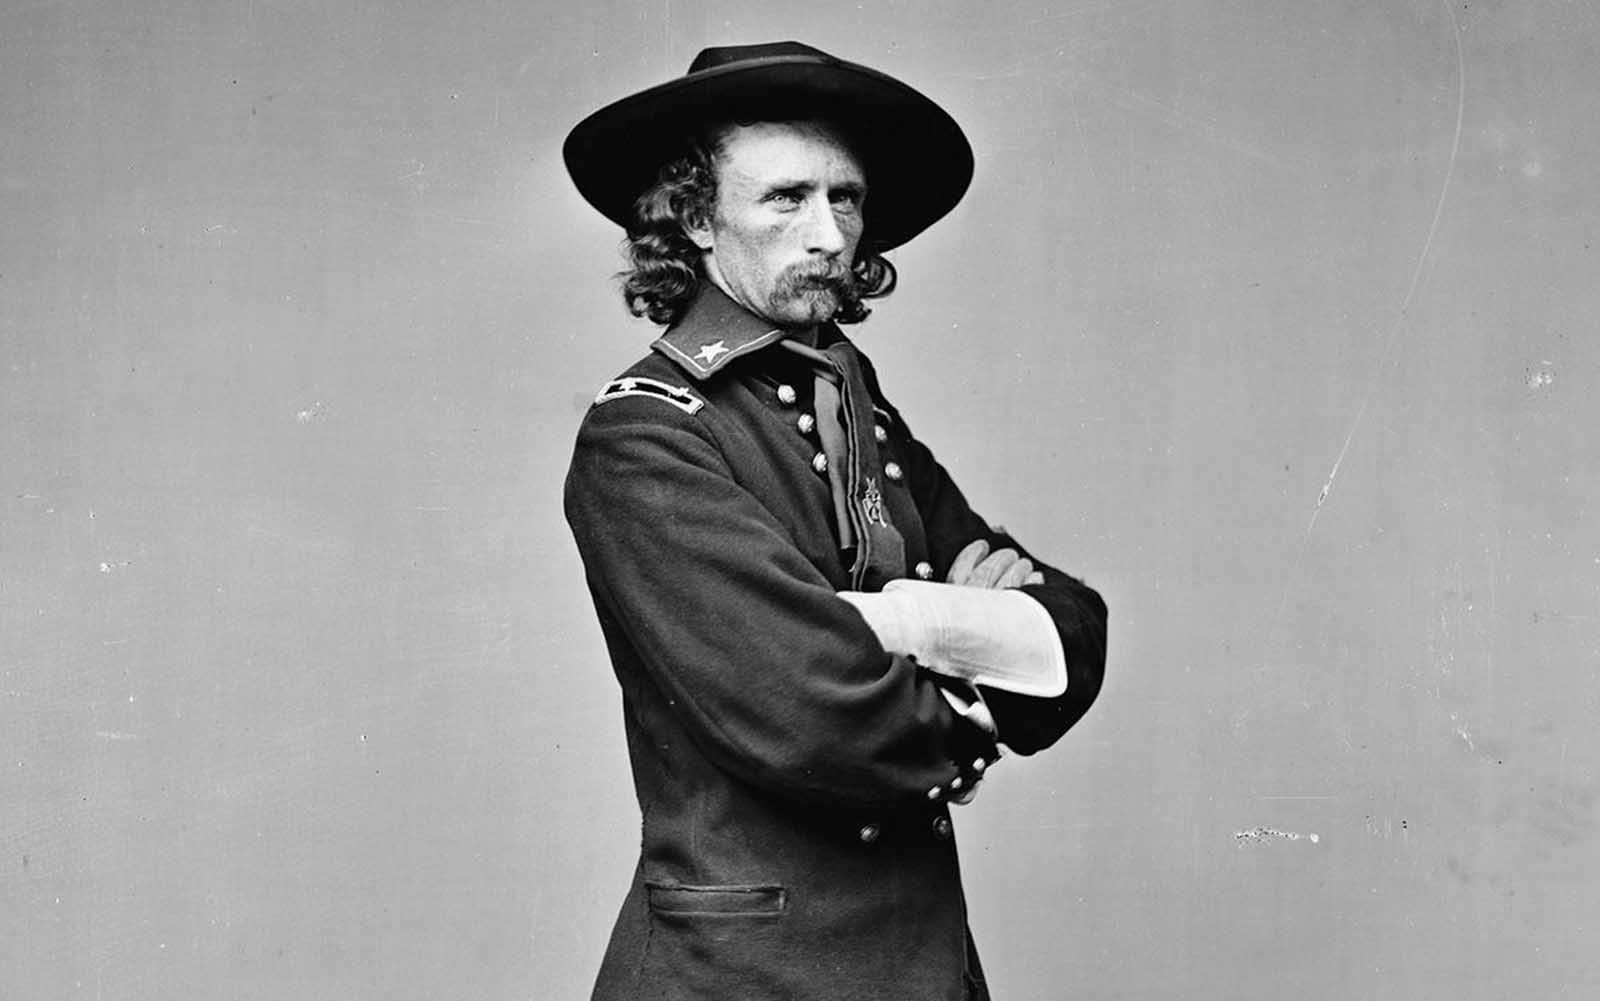 General George Armstrong Custer, a United States Army officer and cavalry commander in the American Civil War and the Indian Wars. Custer built a strong reputation during the Civil War, and afterwards he was sent west to fight in the Indian Wars. Custer was later defeated and killed at the famous Battle of the Little Bighorn in in eastern Montana Territory, in 1876.